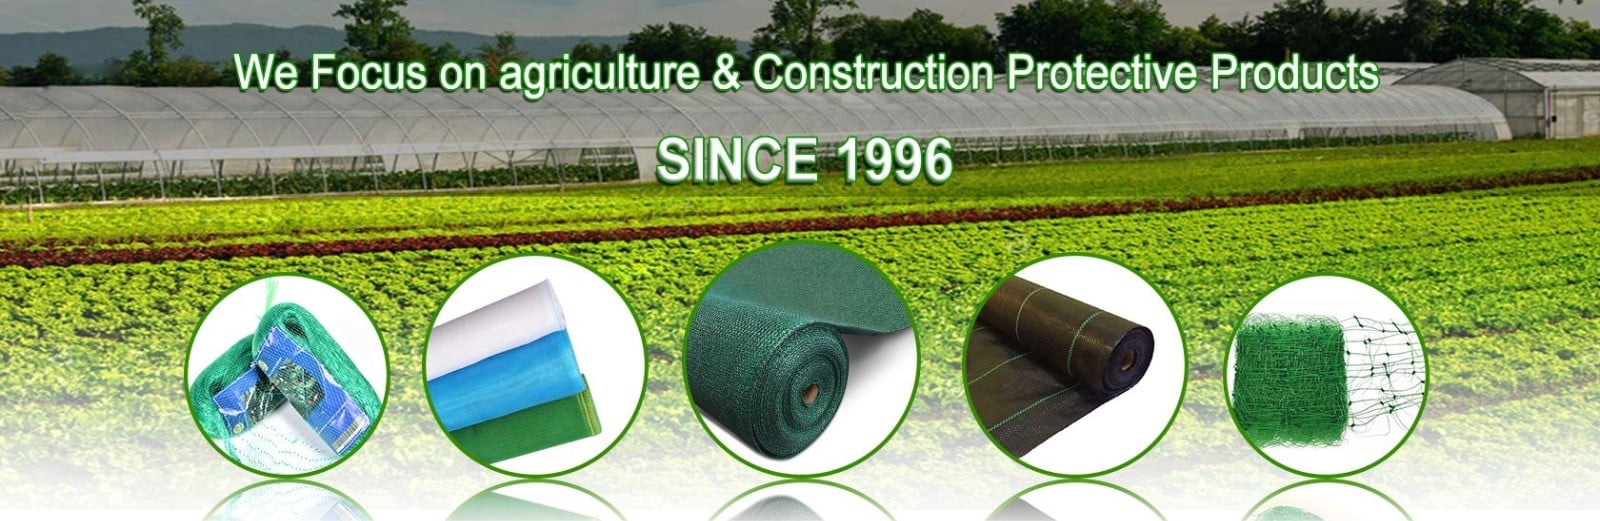 We main products are shade net, shade sail,balcony net,privacy fence screen,anti insect net,ground cover cloth ,tarpaulin,fiberglass window screen etc.